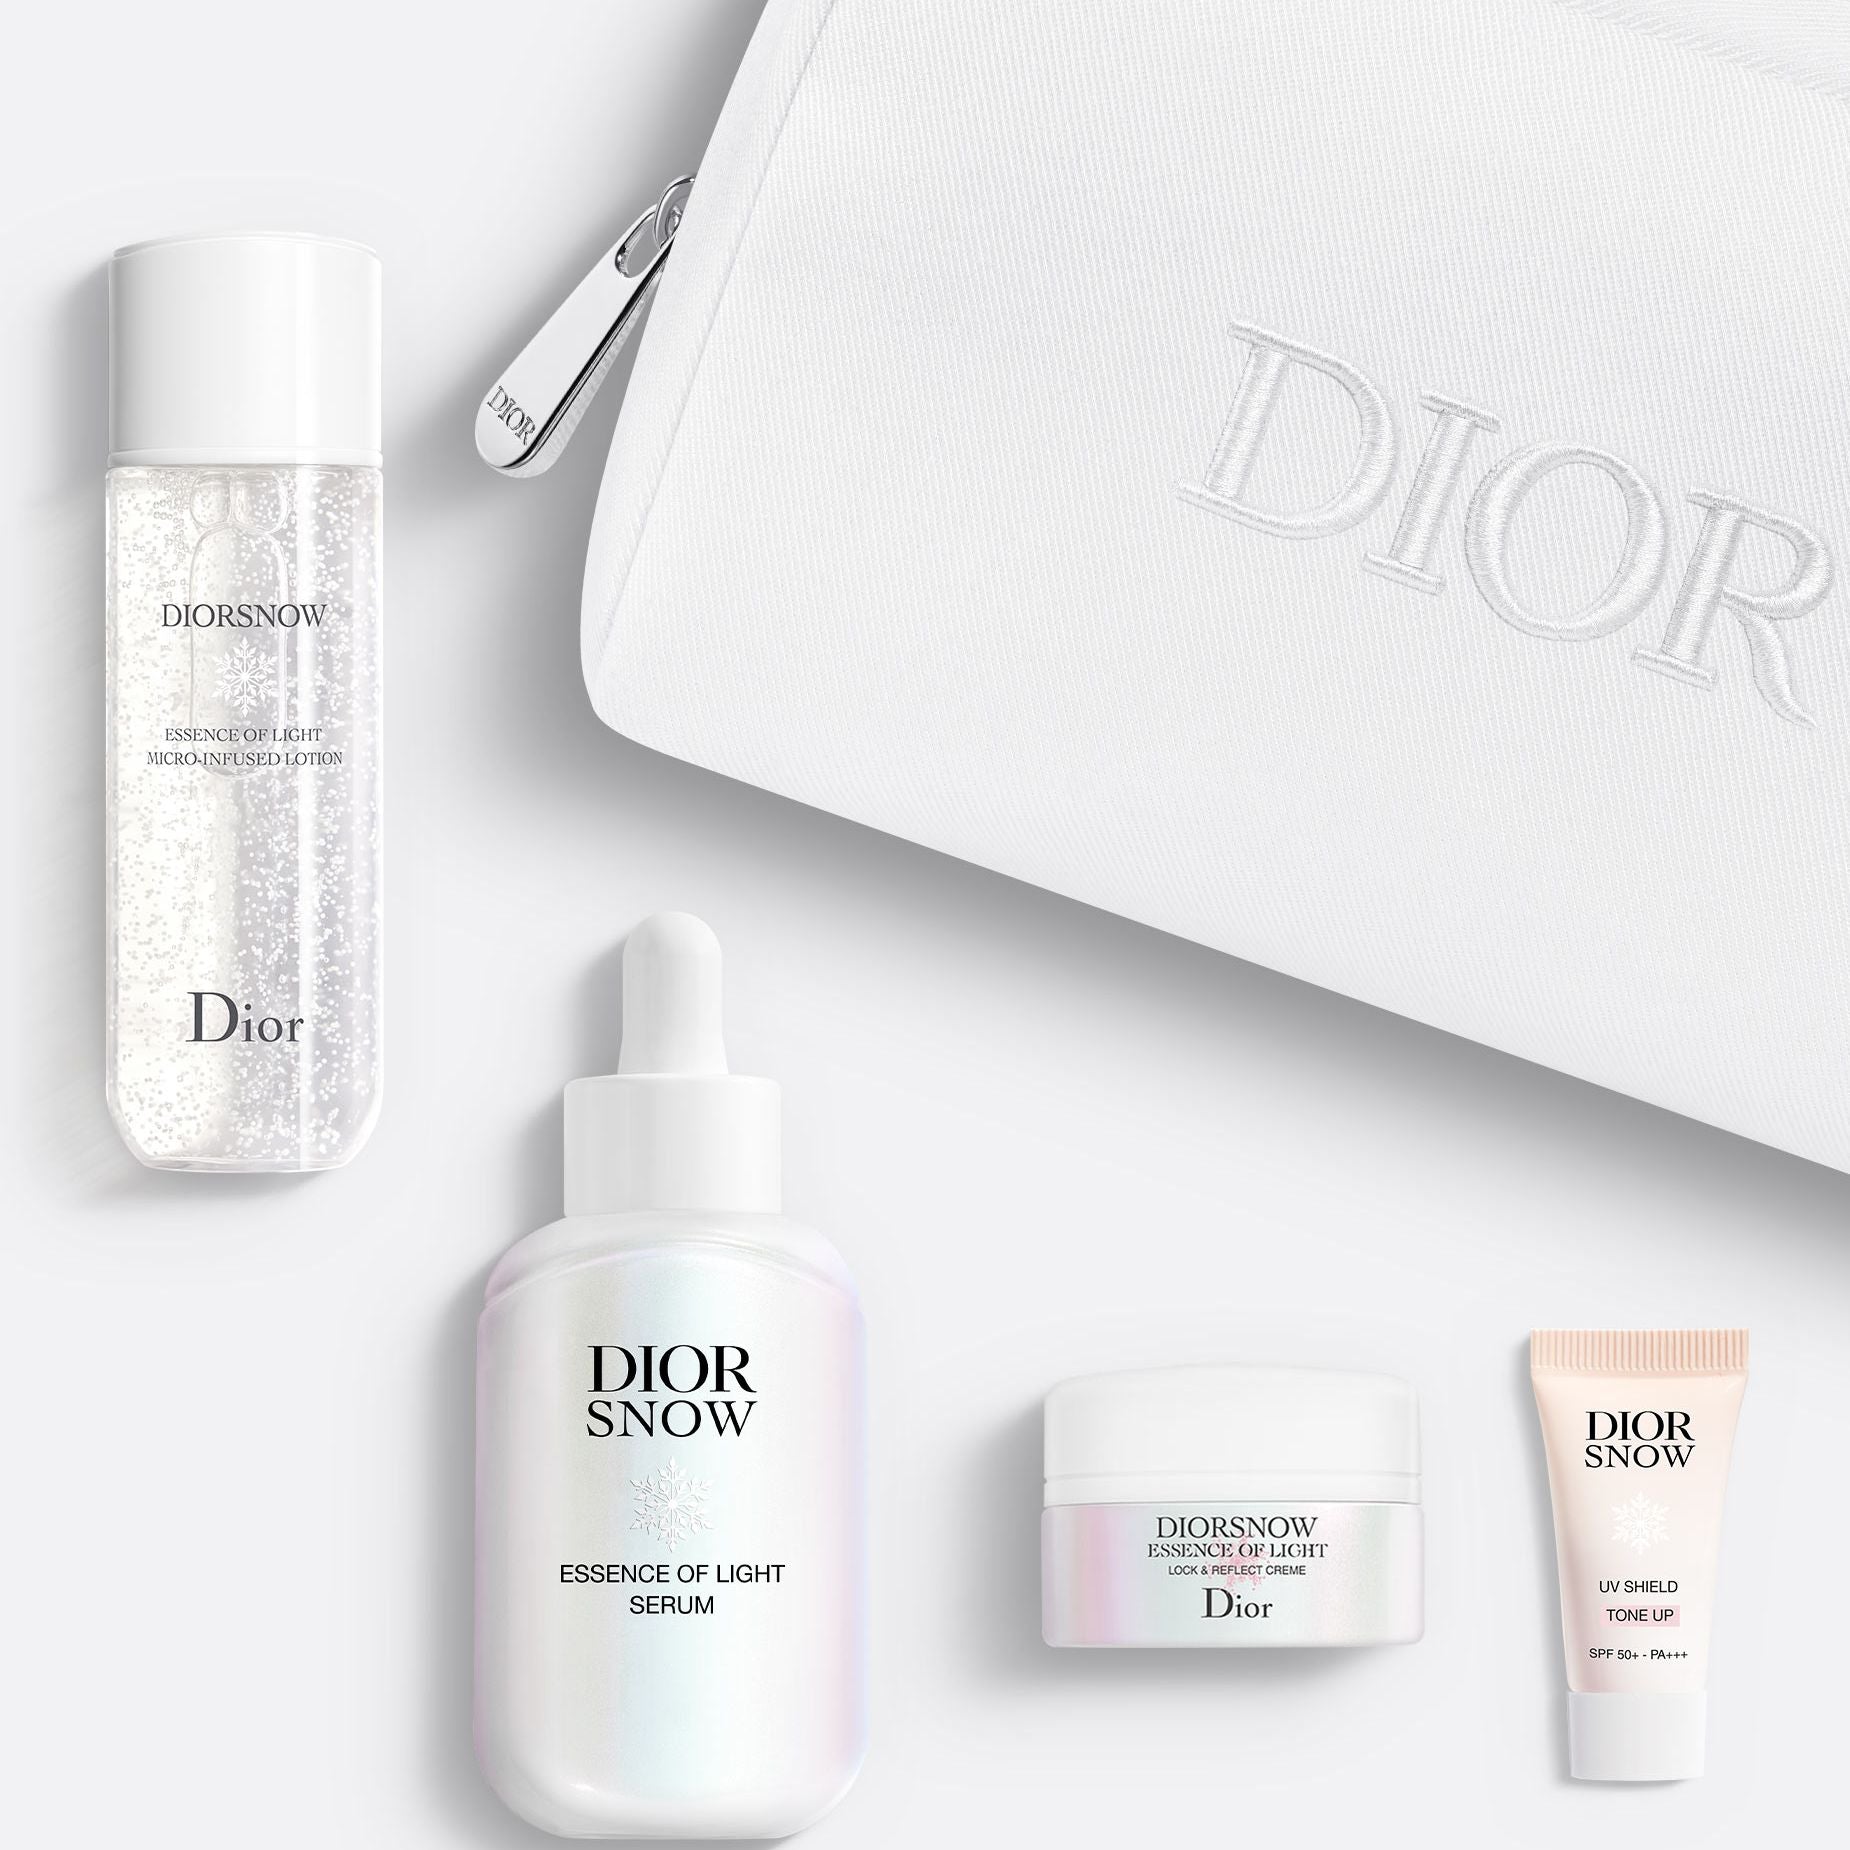 DIORSNOW THE GLOW PROTOCOL ~ Lotion, serum, hydrating cream, UV protection and reusable pouch